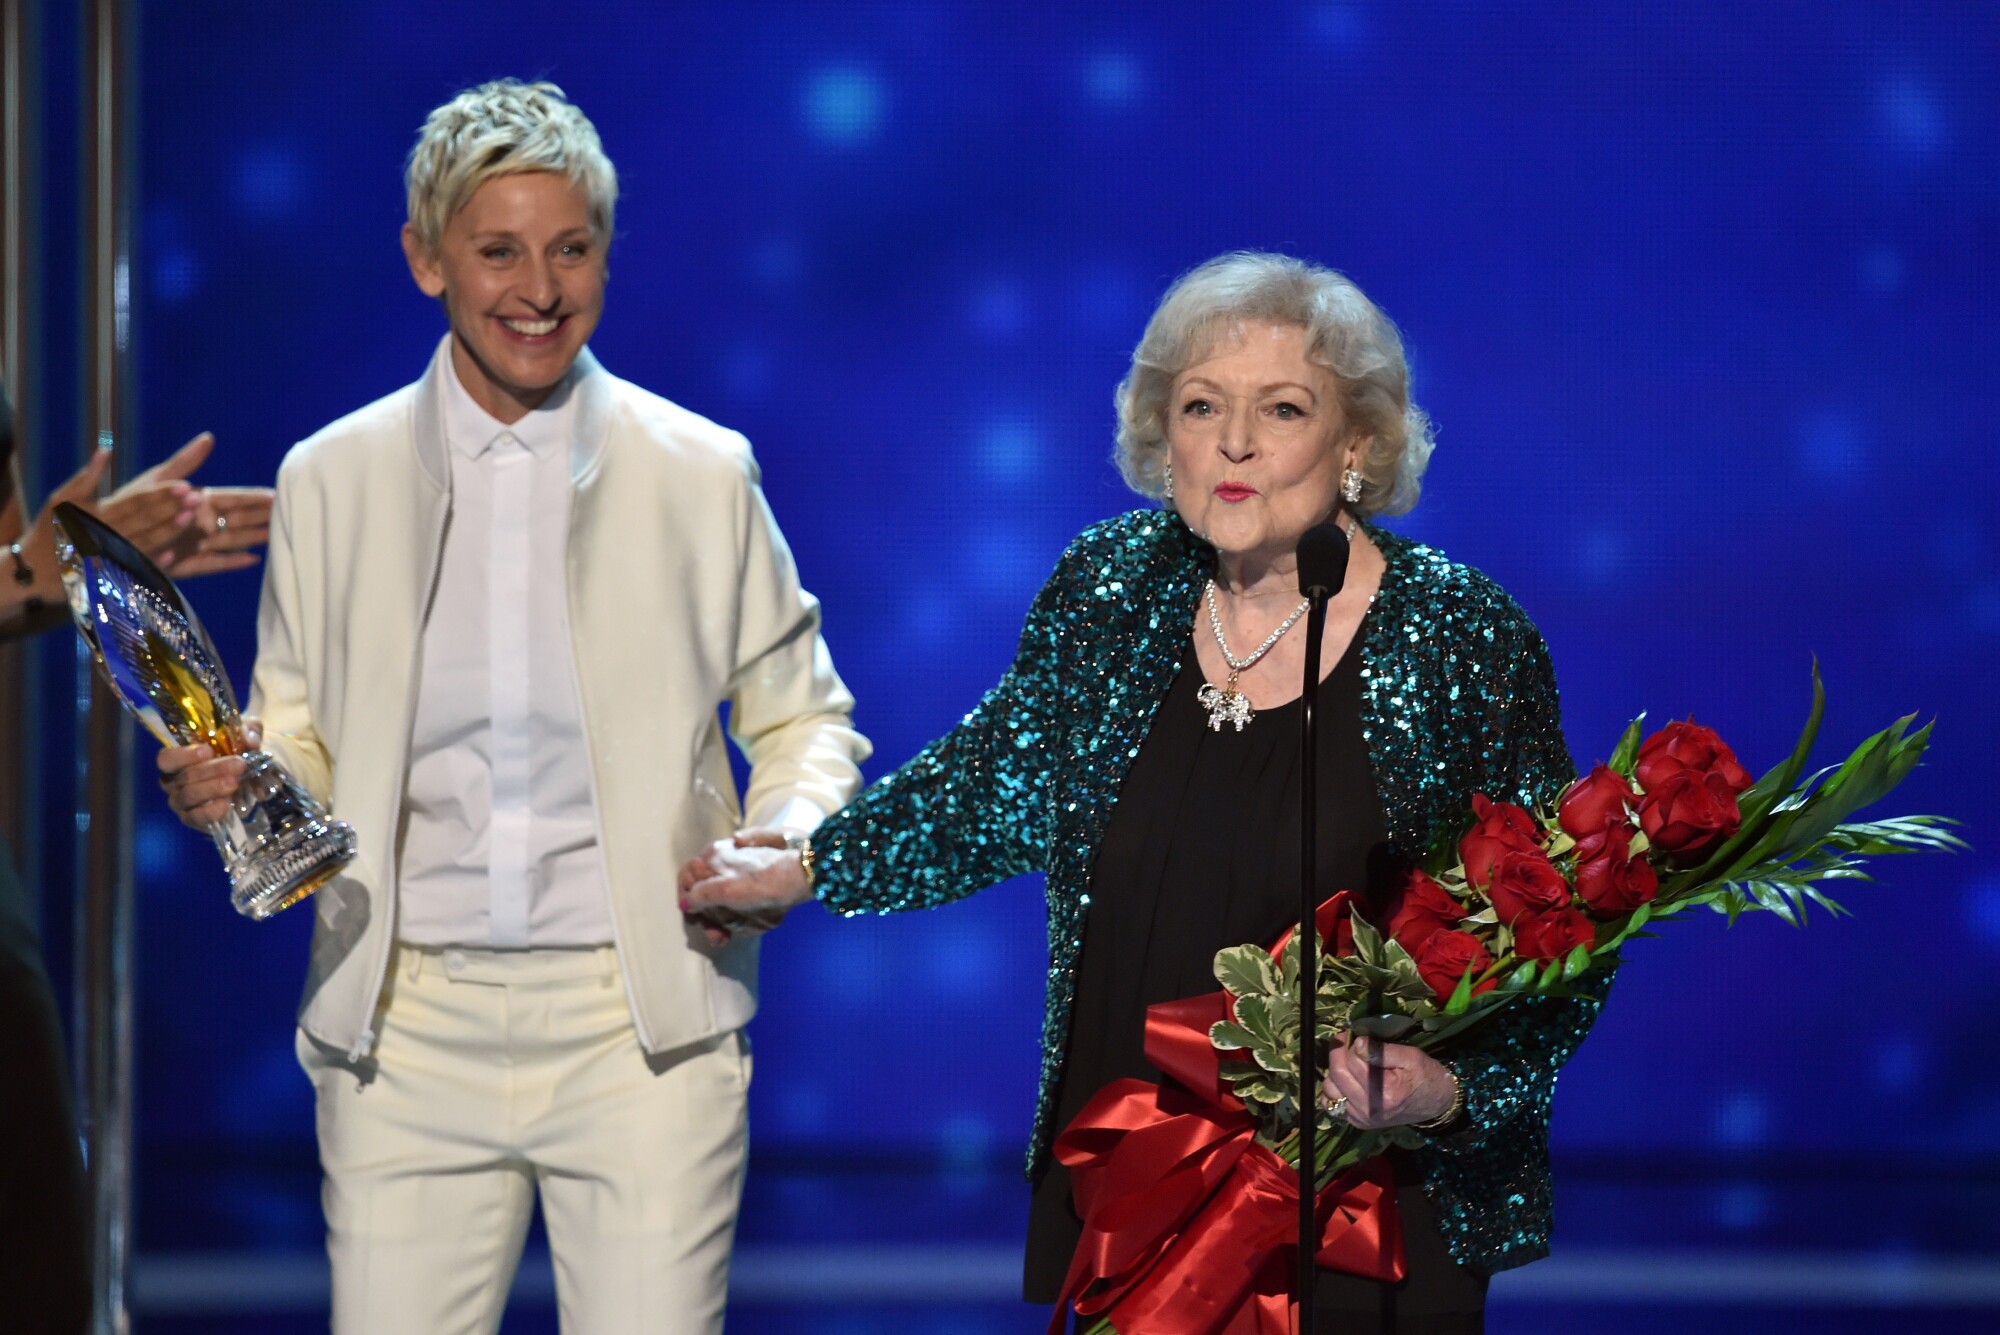 Ellen DeGeneres, left, and Betty White speak on stage at the 41st People's Choice Awards at the Nokia Theater.